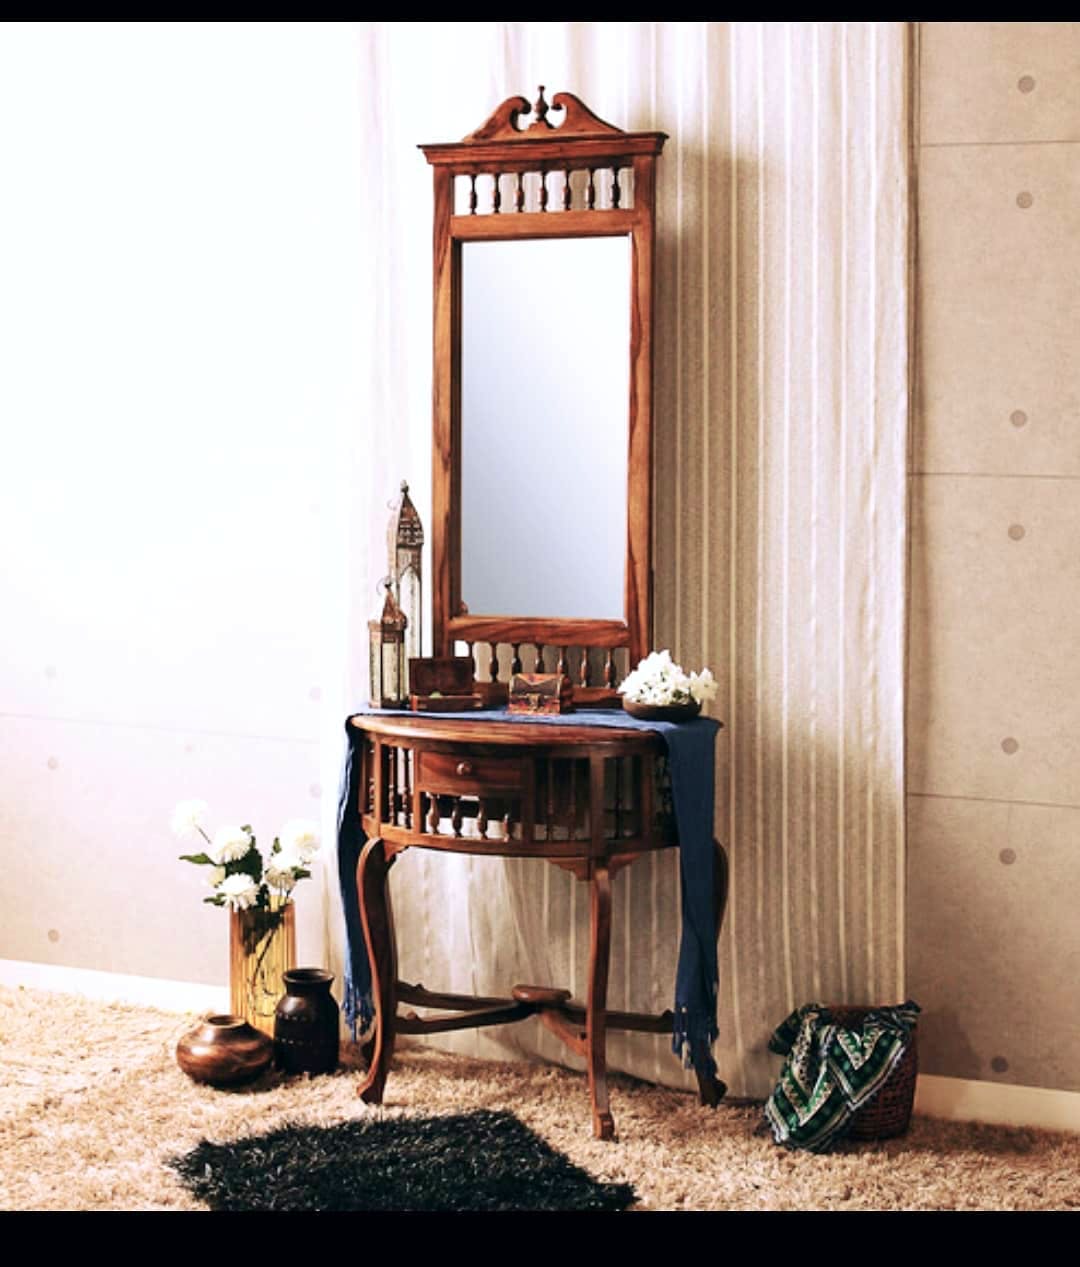 Furniture,Table,Chair,Room,Mirror,Still life photography,Antique,Interior design